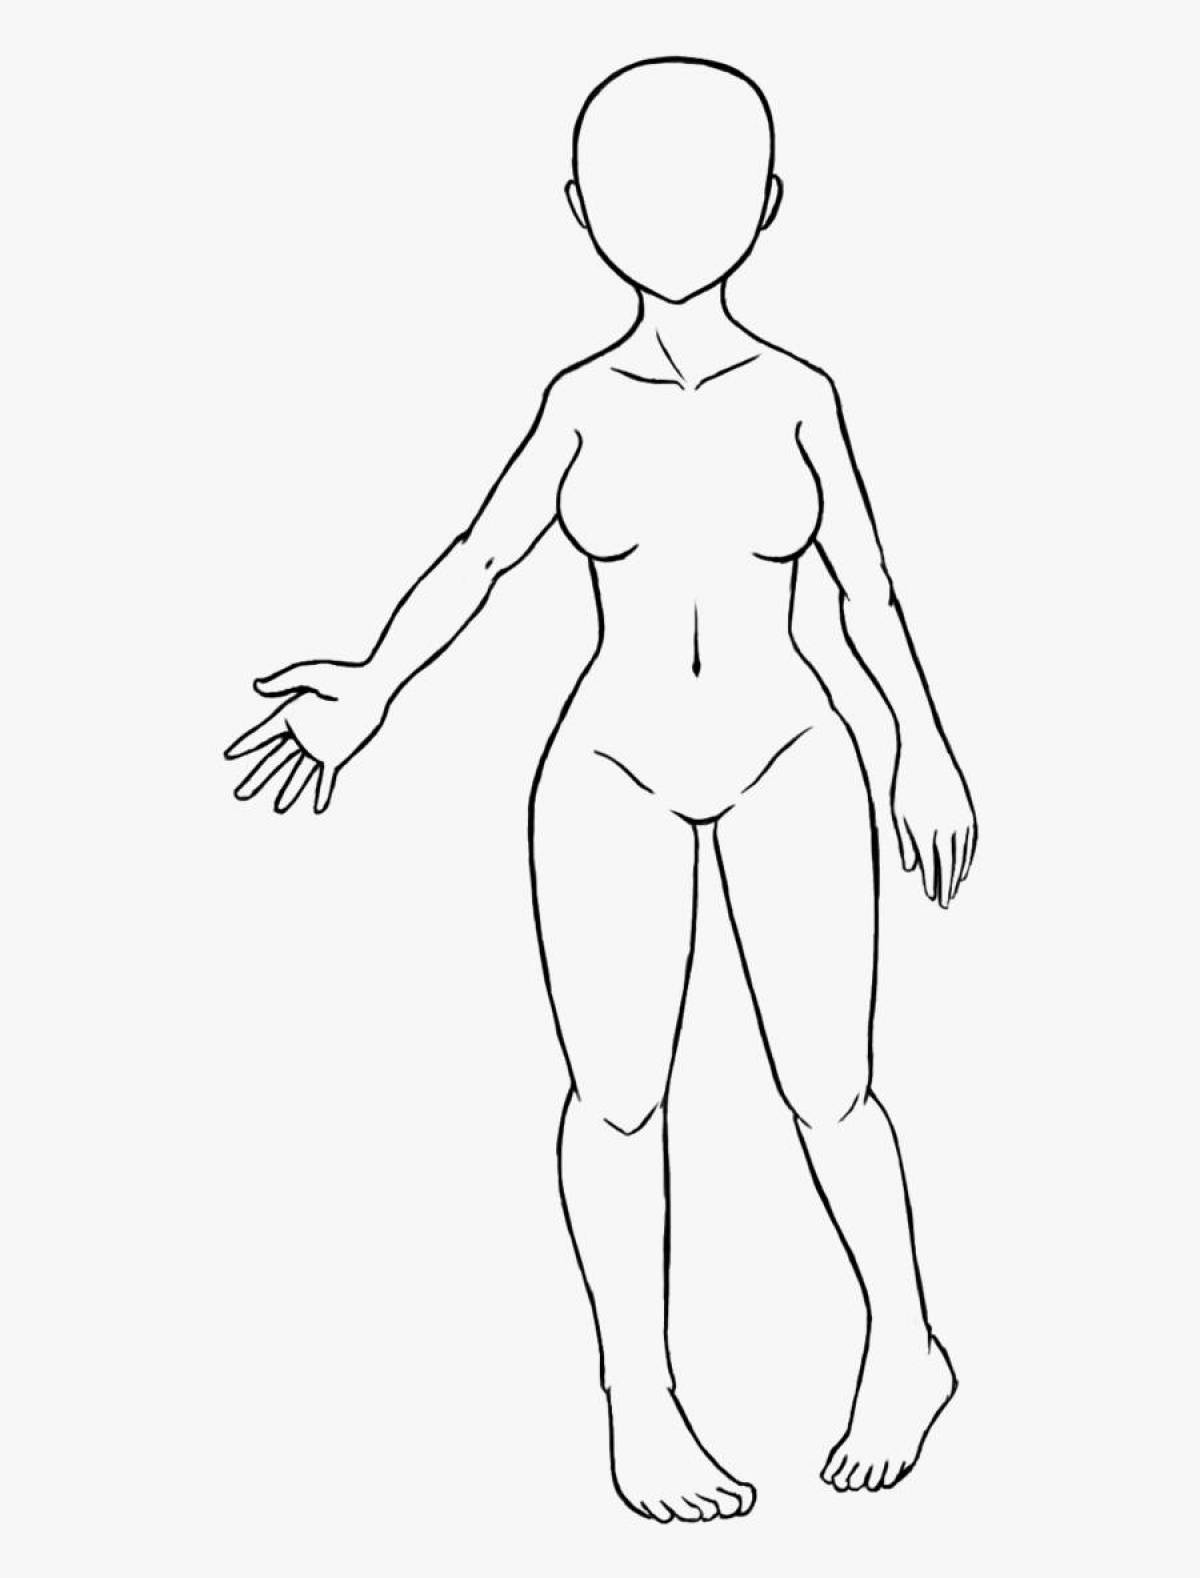 Magic mannequin coloring page